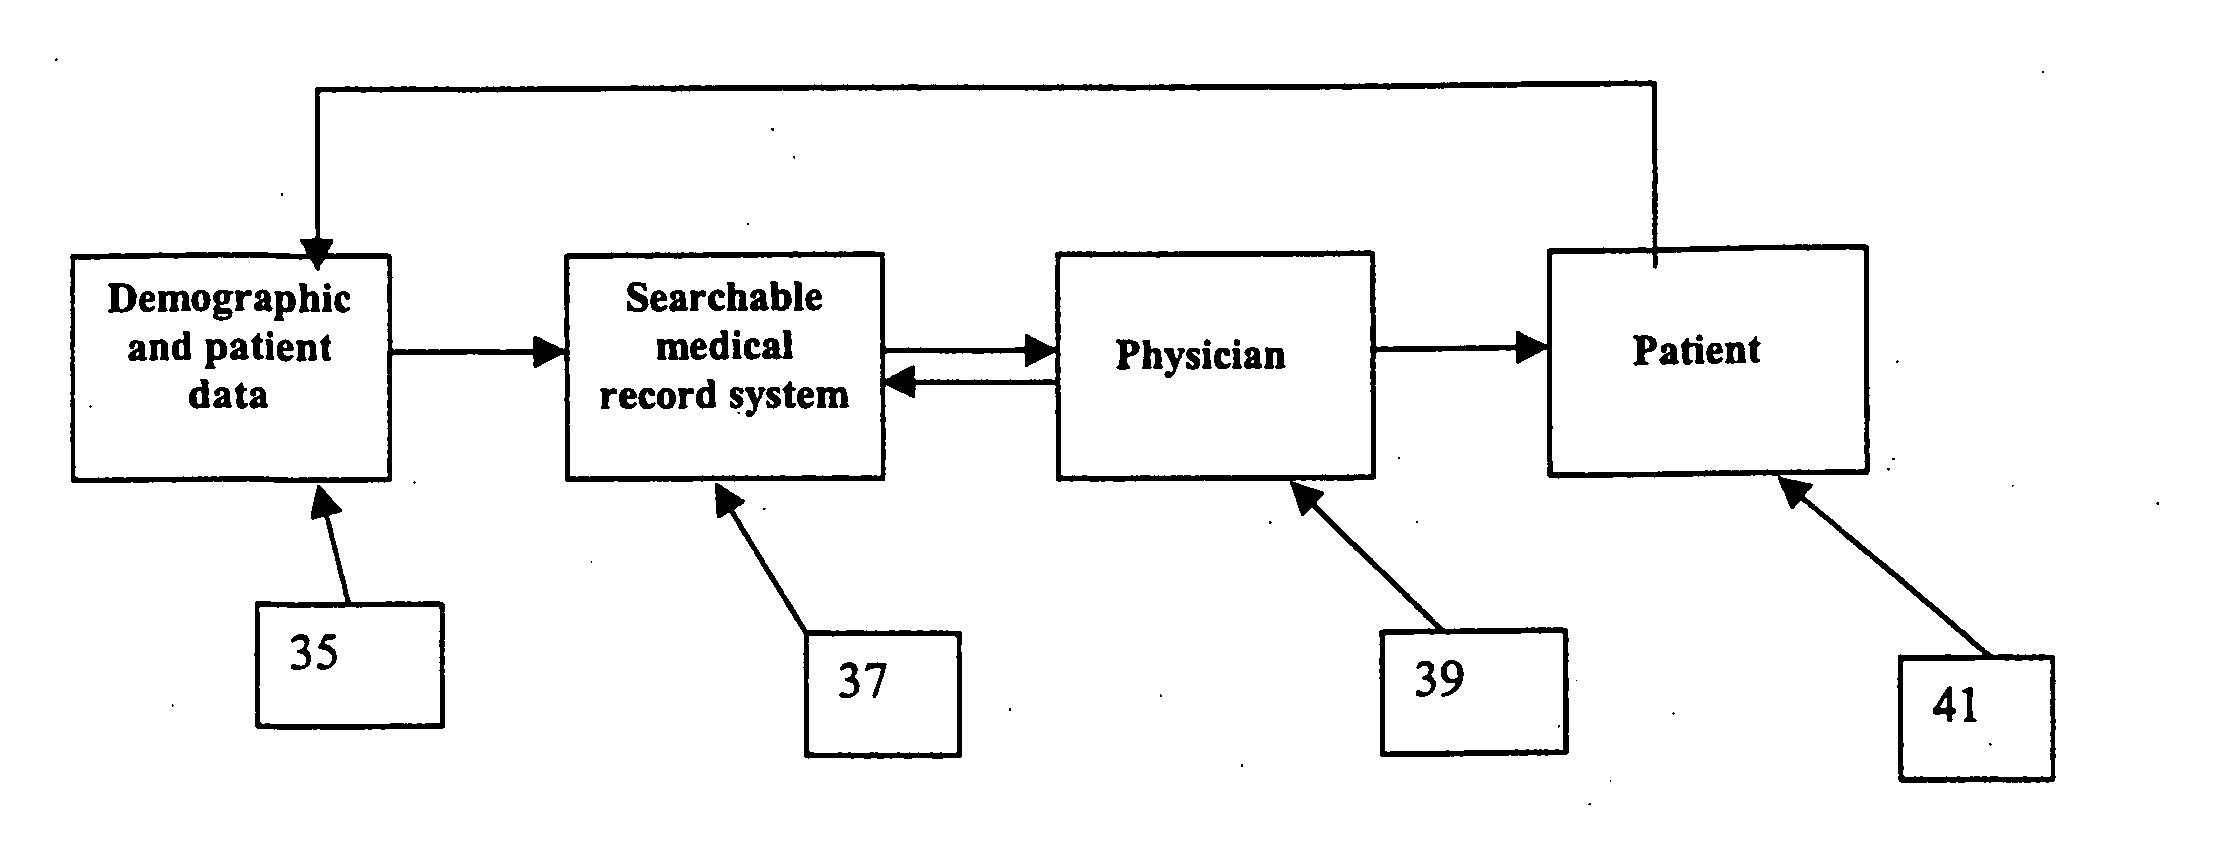 Method for the construction and utilization of a medical records system